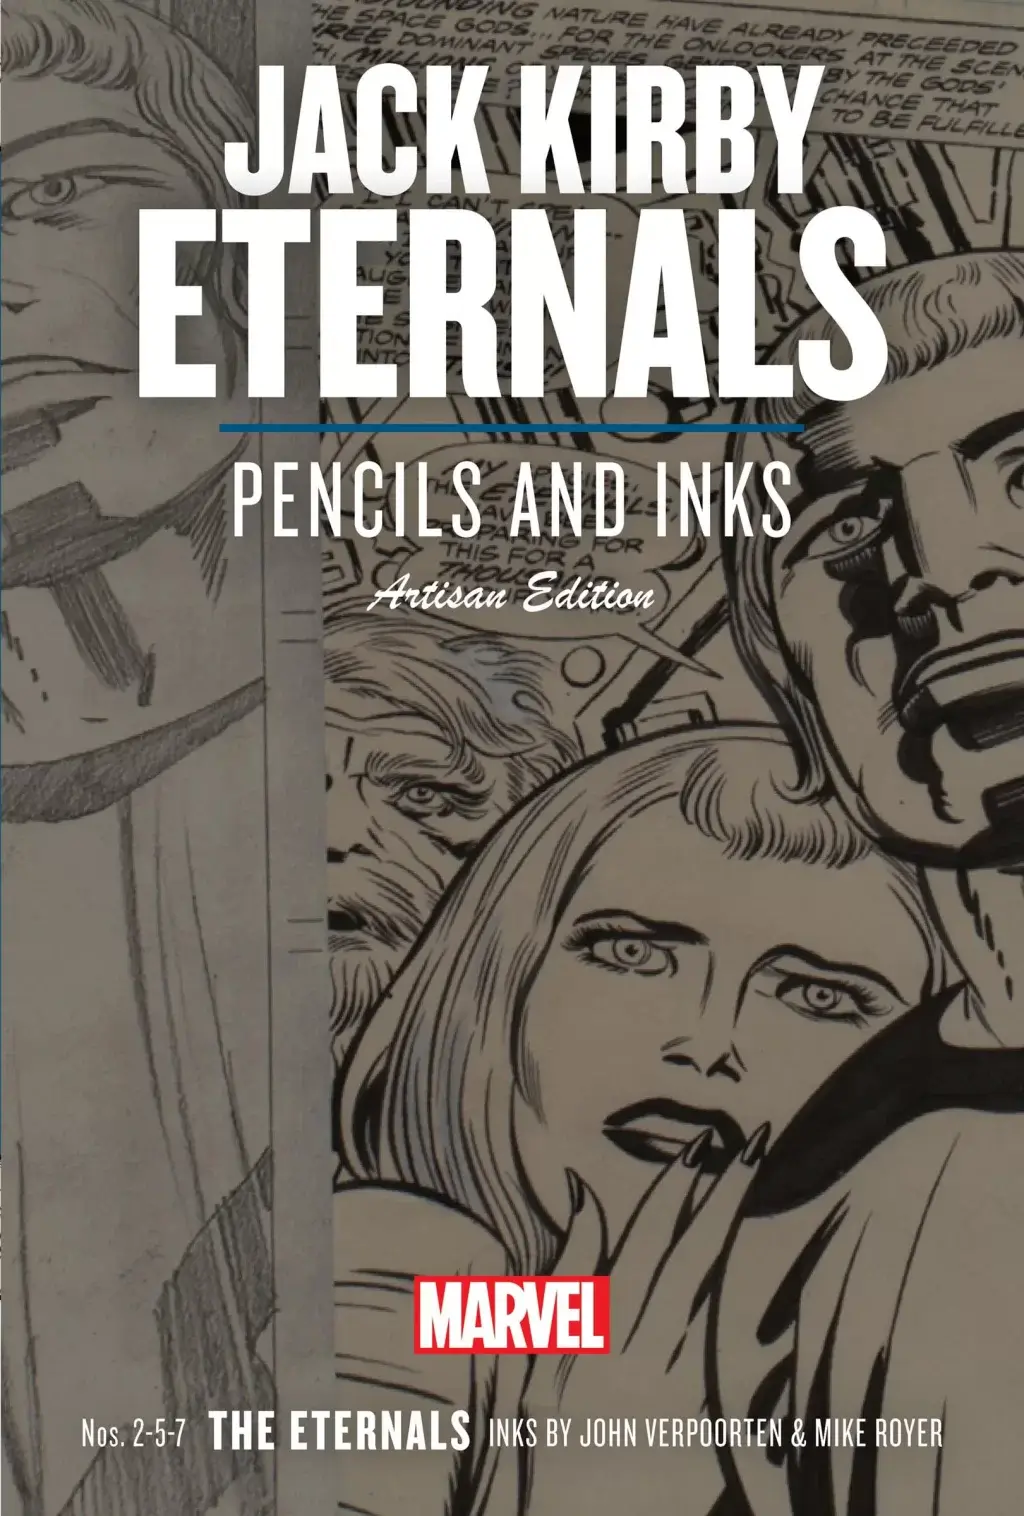 Jack Kirby Eternals Pencils and Inks Artisan Edition cover